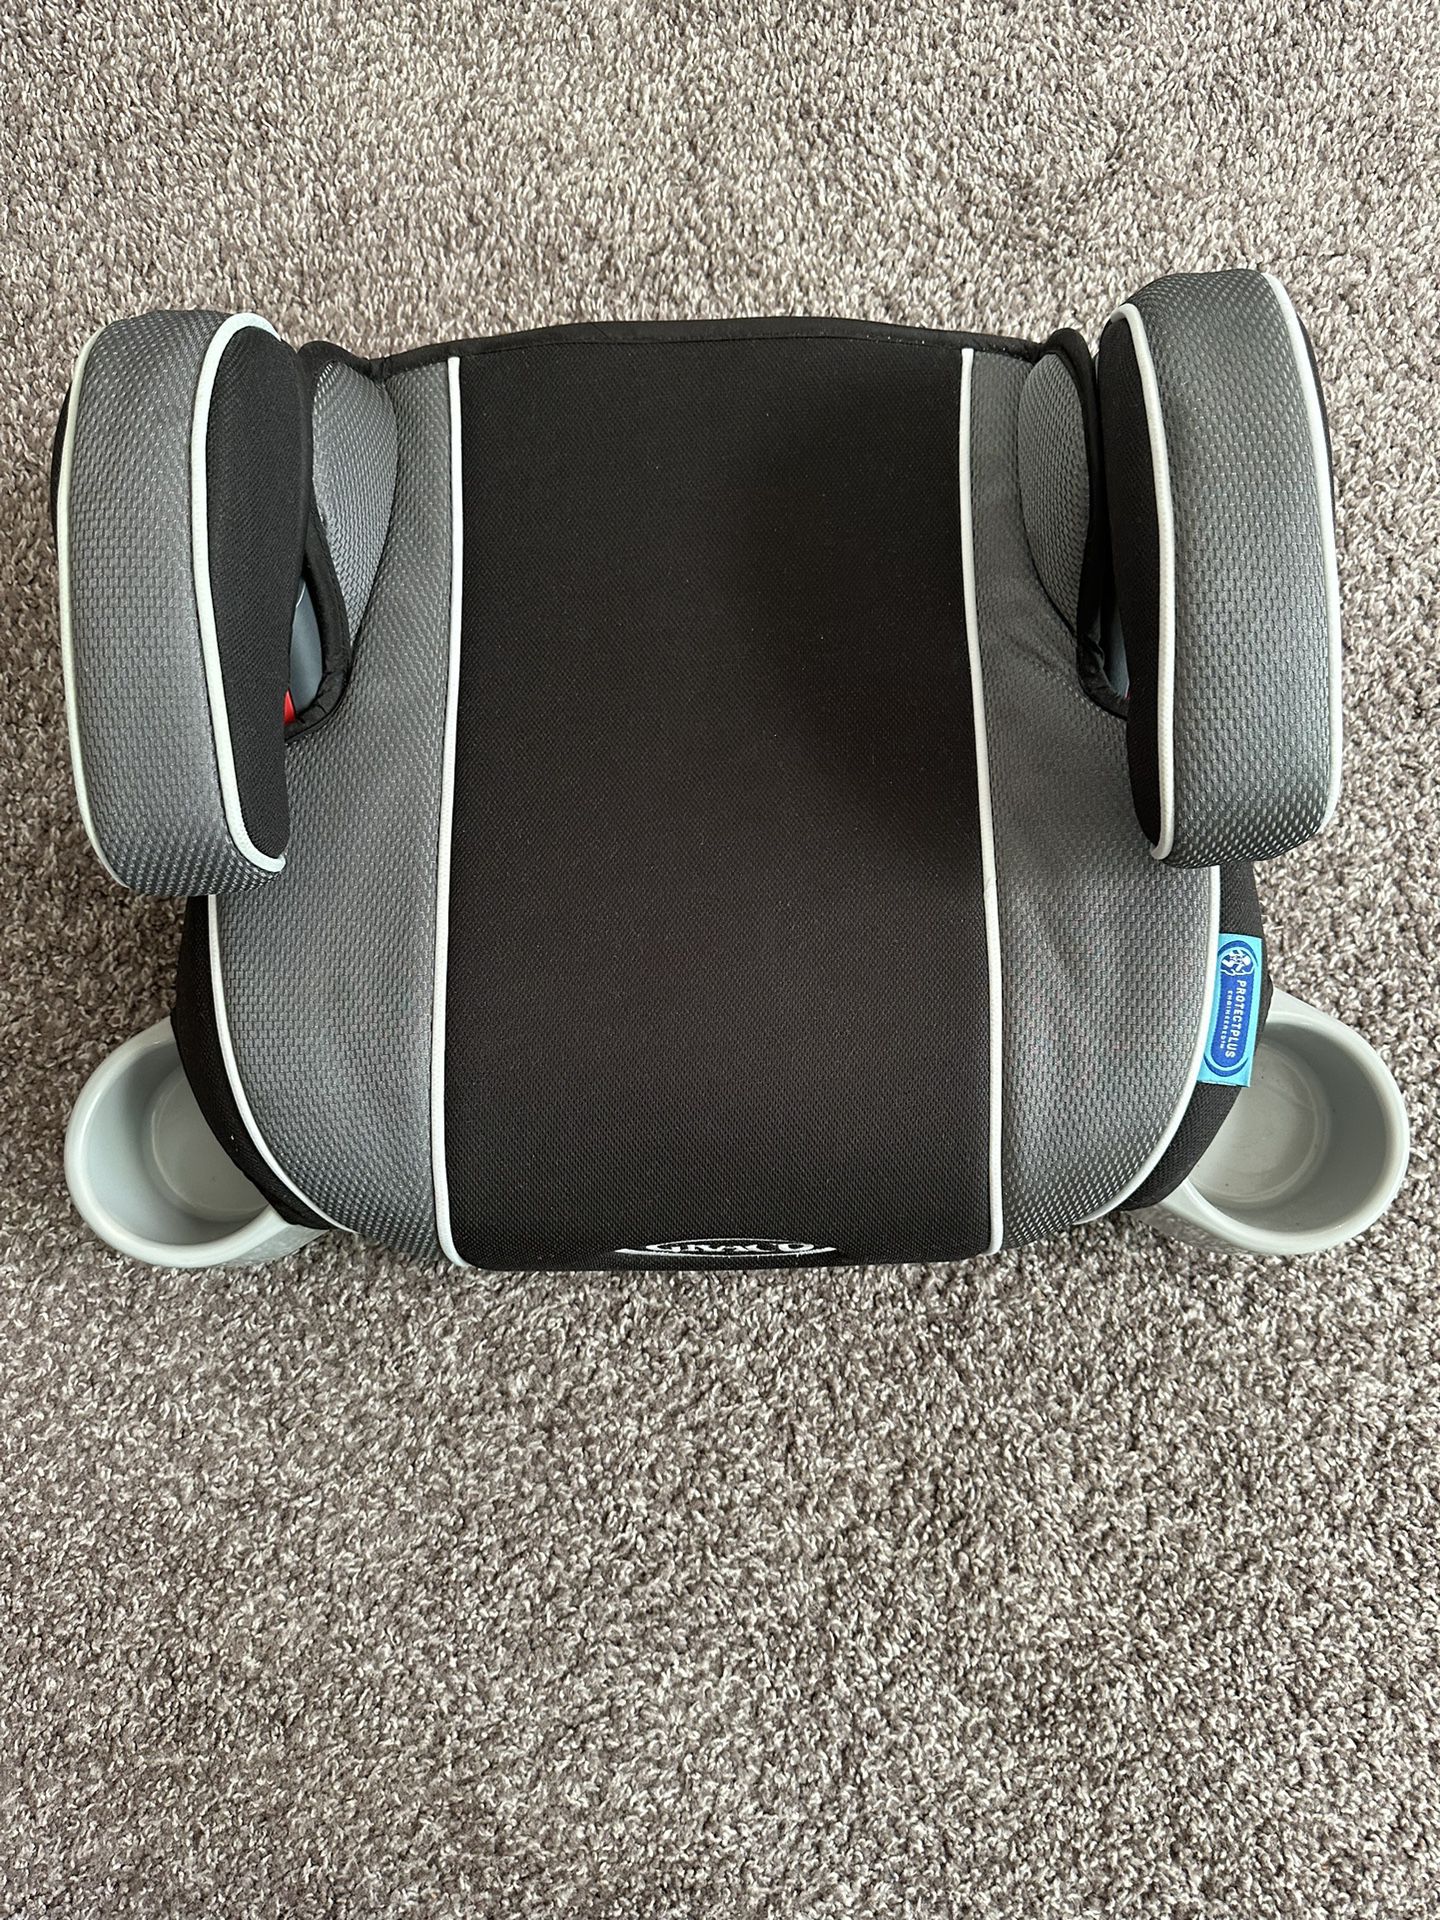 Car seat for toddlers.